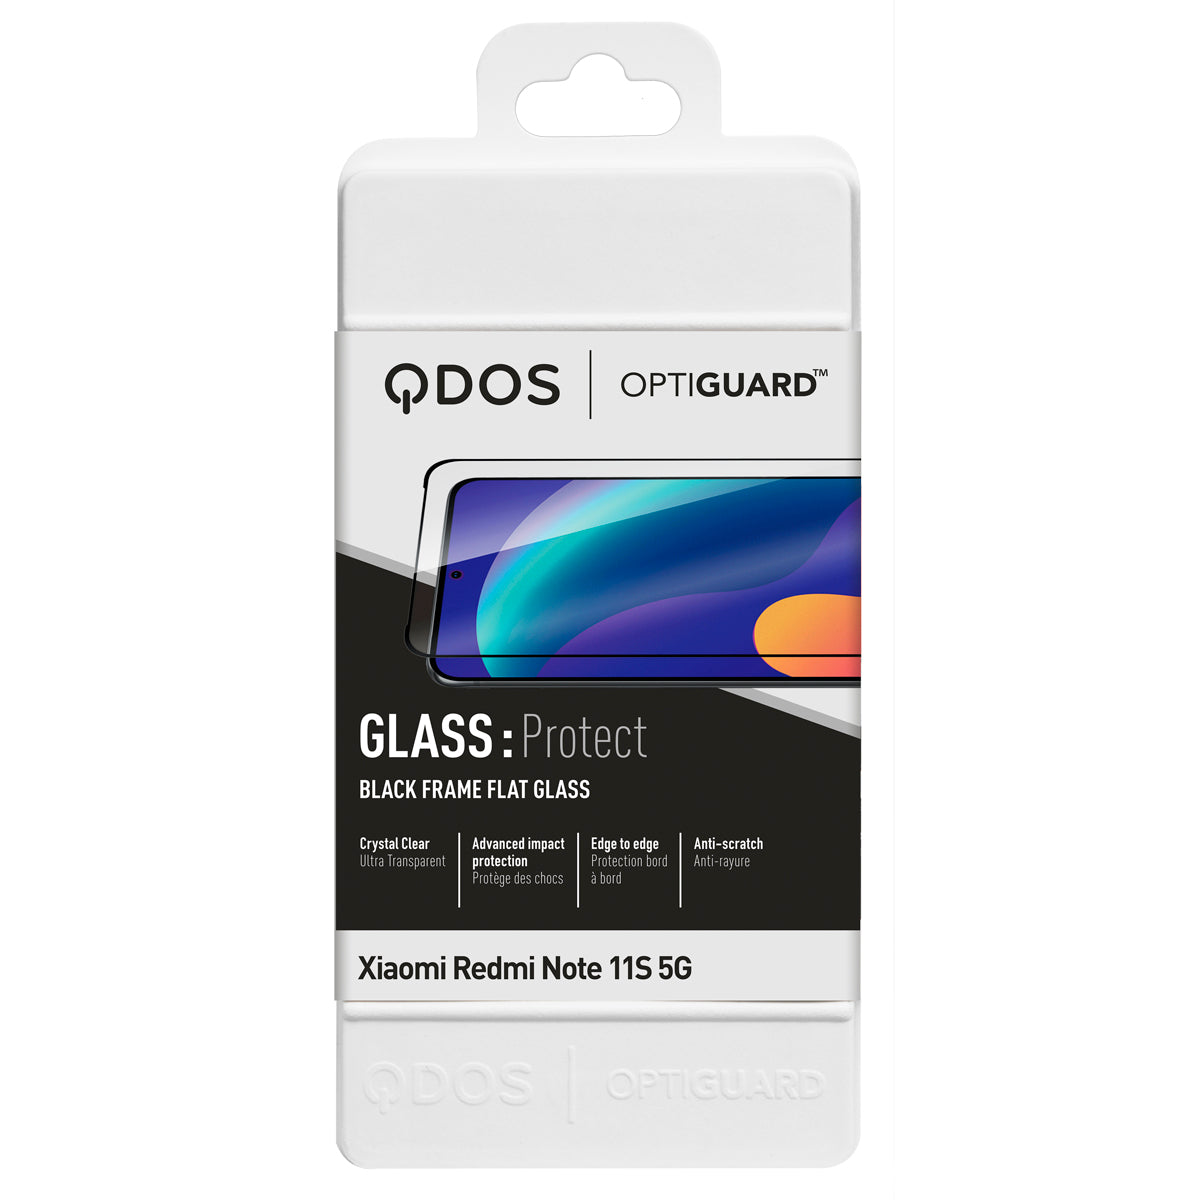 OptiGuard Glass Protect Black for Redmi Note 11S - Clear / Black Frame